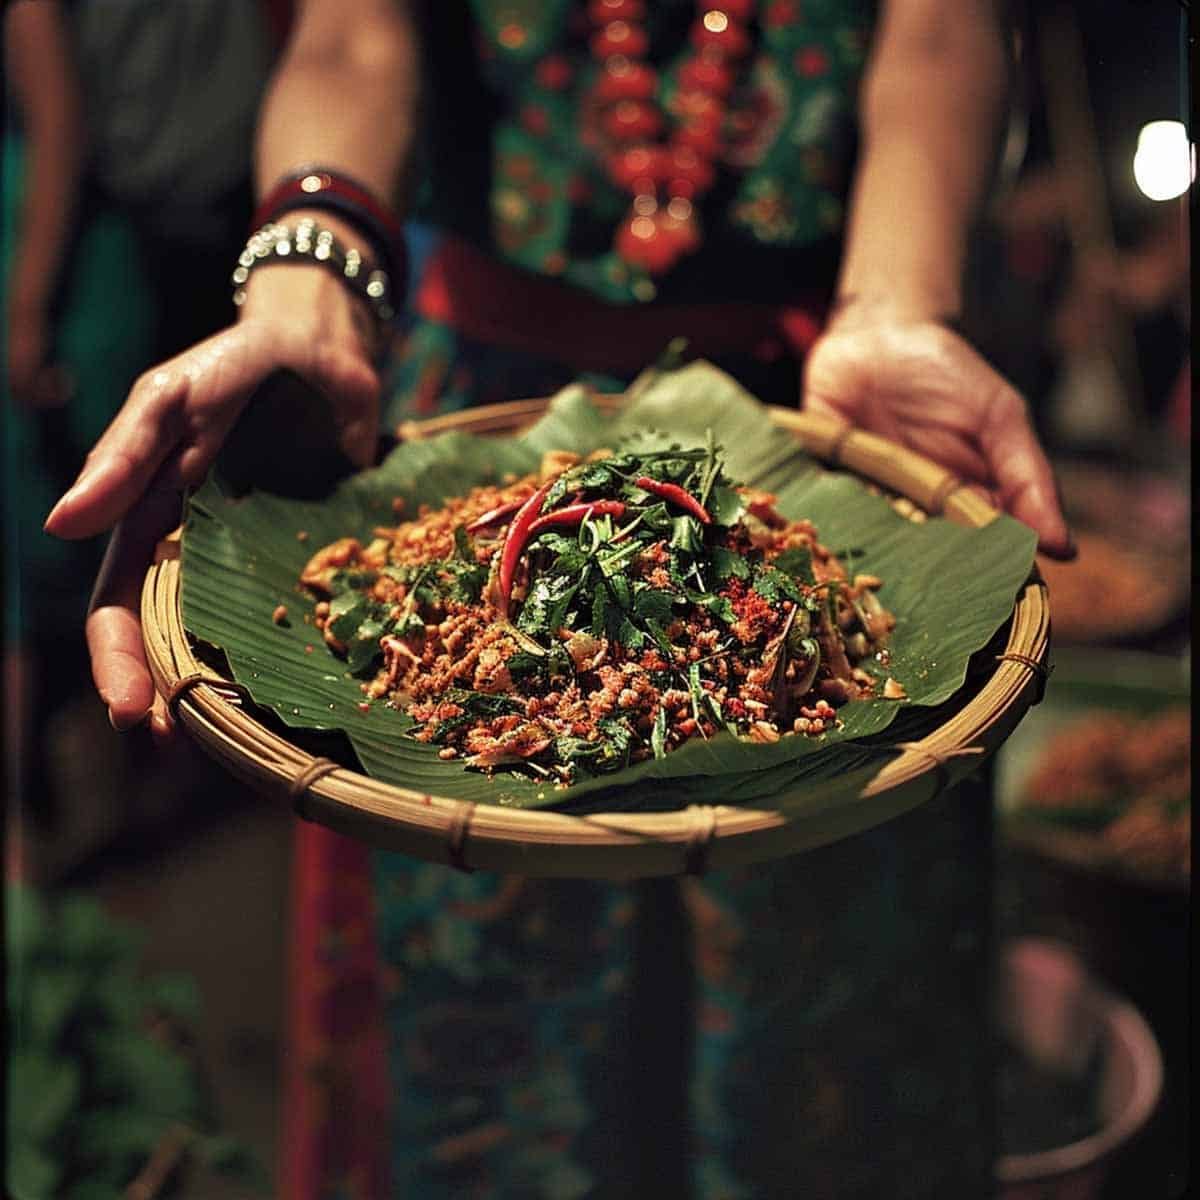 A woman serving a plate of Larb, also known as Laab, containing finely minced meat seasoned with lime, chili, and fish sauce, garnished with fresh herbs like mint and cilantro, and topped with toasted rice. She smiles as she presents the colorful, aromatic dish


